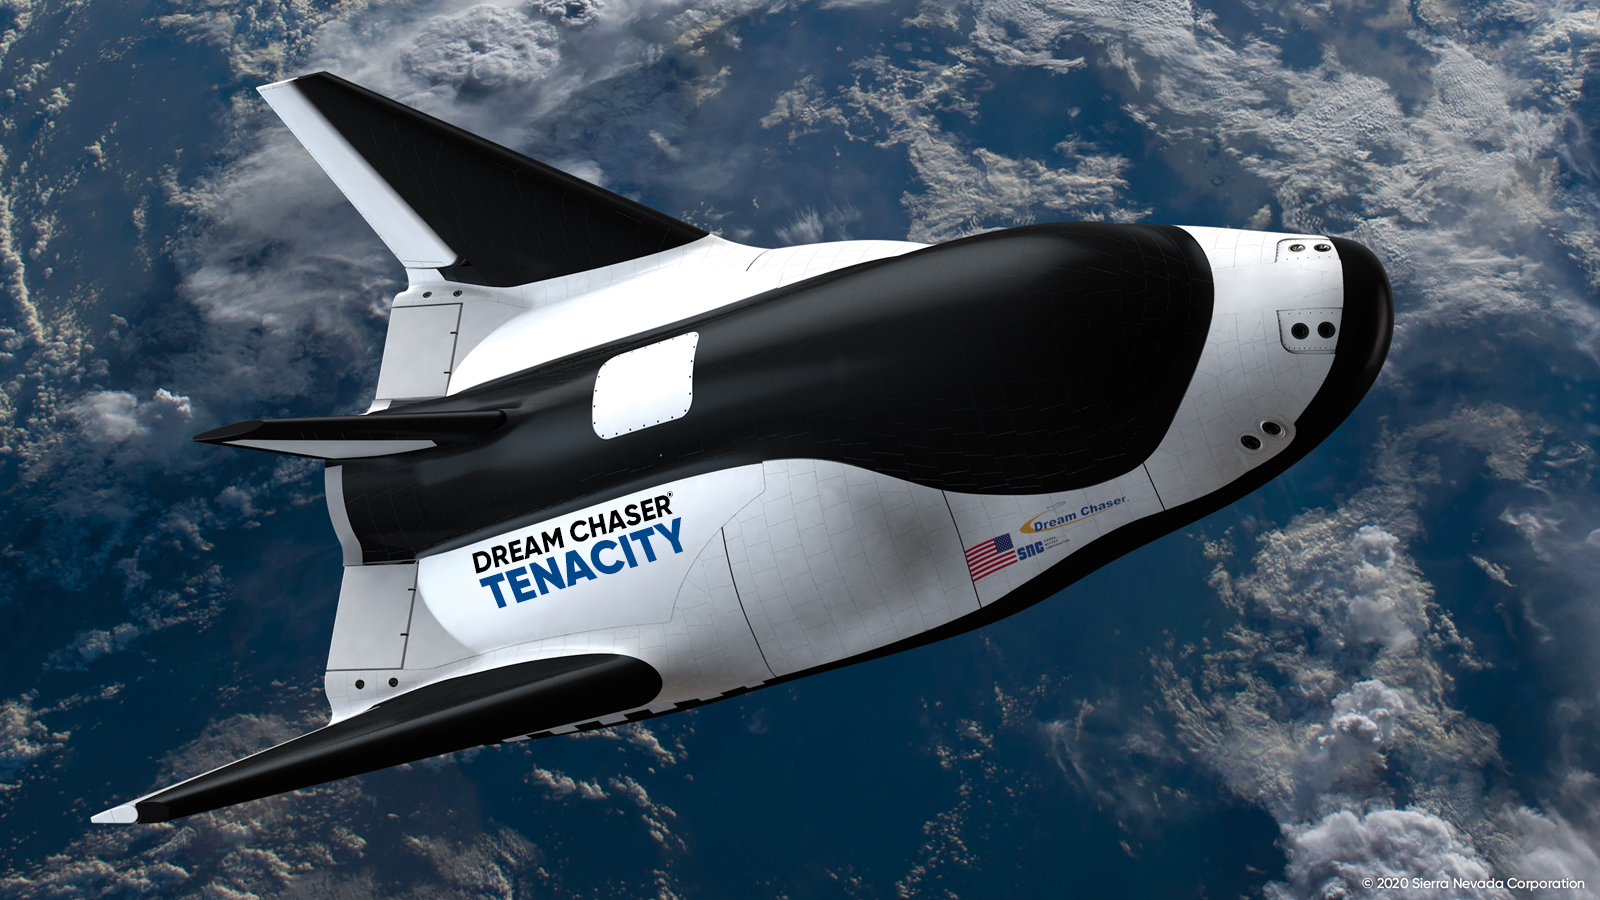 Meet ‘Tenacity’: 1st Dream Chaser space airplane gets a reputation